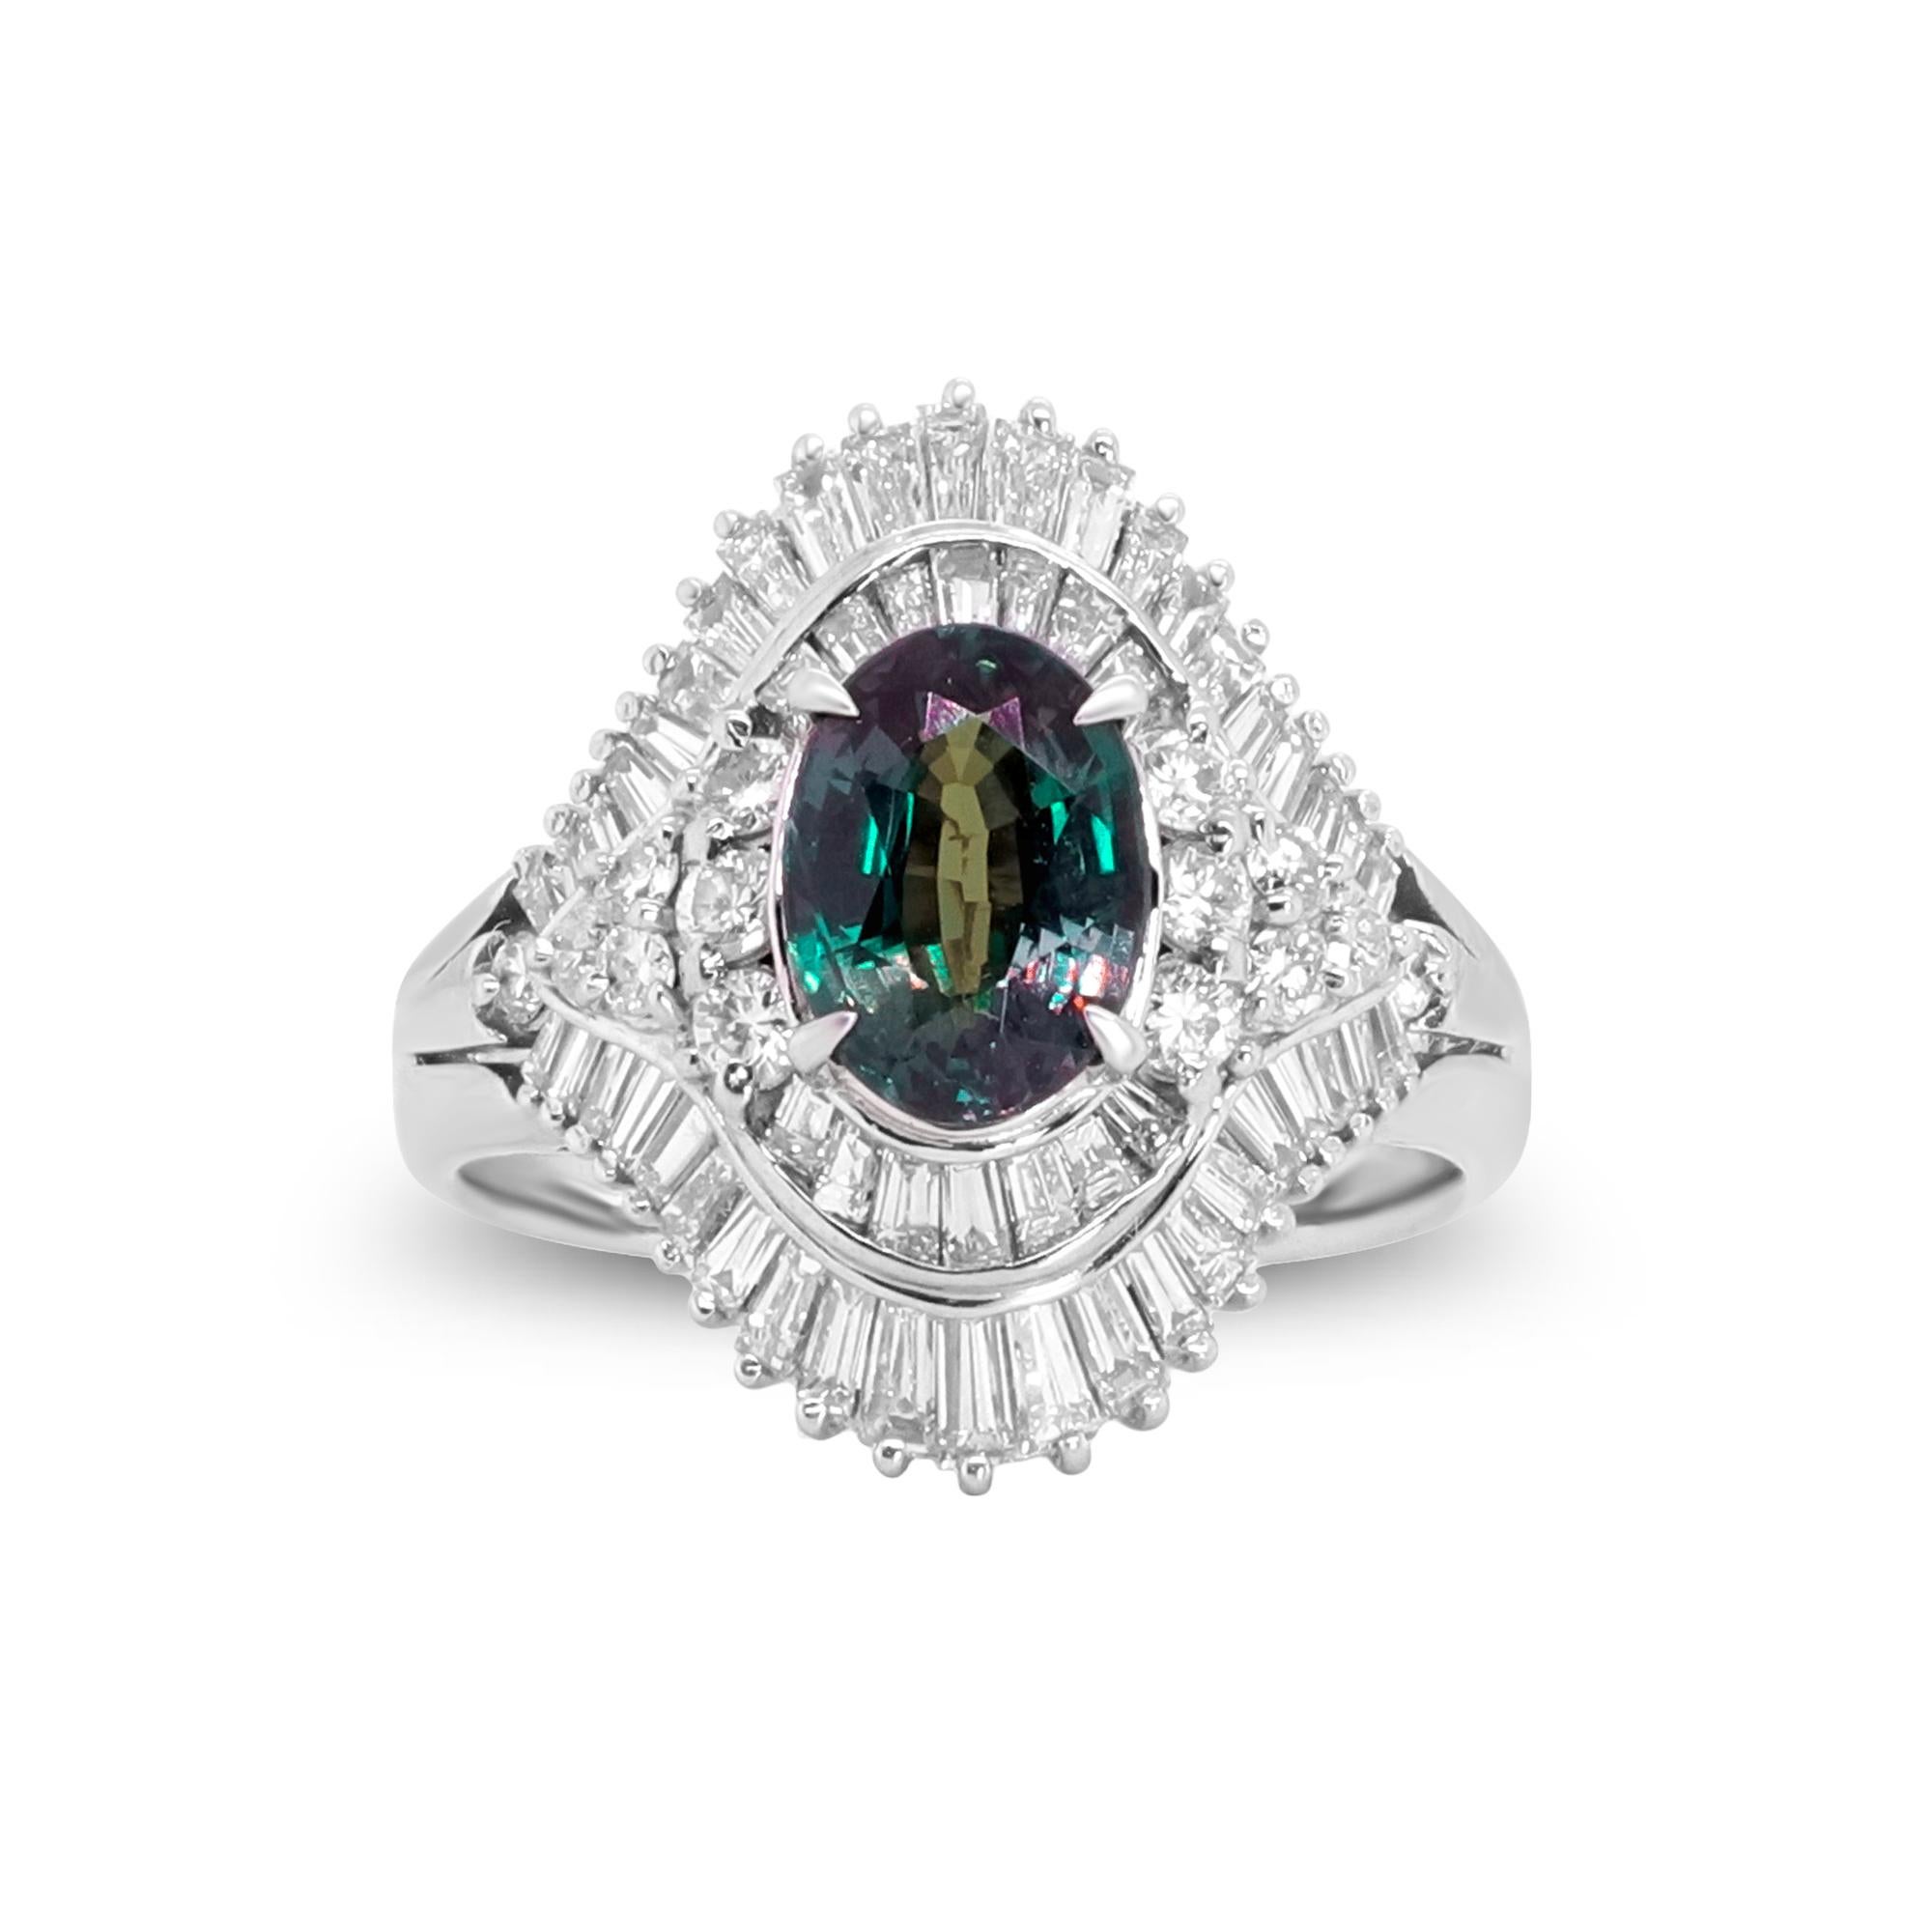 Stunning, timeless and classy eternity Unique Ring. Decorate yourself in luxury with this Gin & Grace Ring. The Platinum 900 jewelry boasts with Oval-cut (1 pcs) 1.66 carat Alexandrite and Natural white Diamond 1.35 Carat accent stones for a lovely